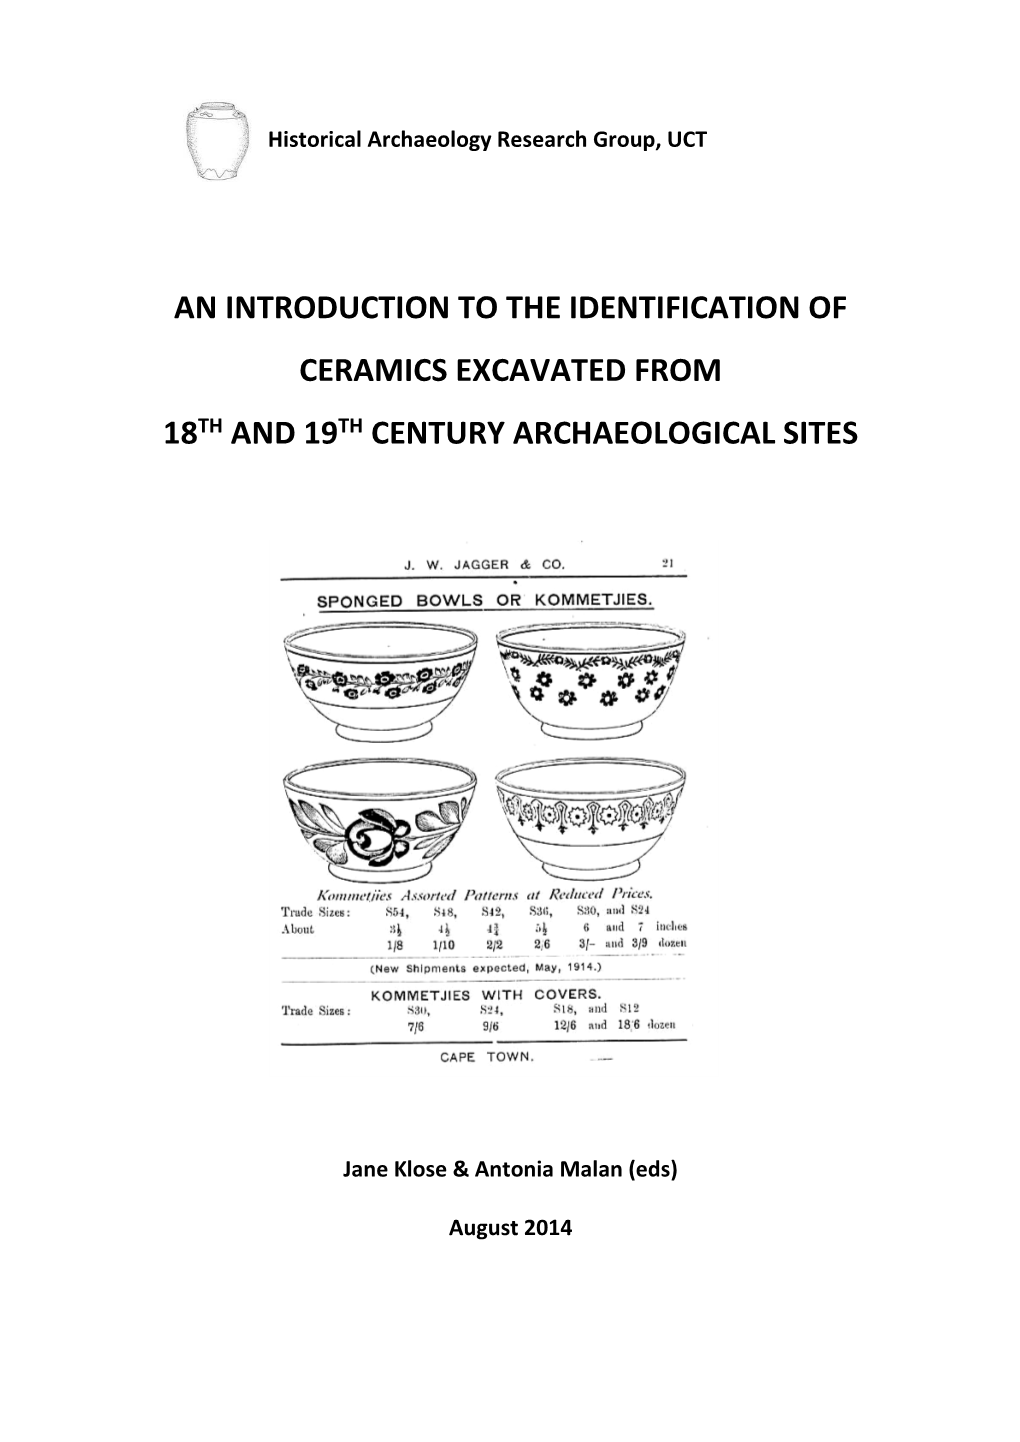 UCT Ceramics Handbook, 2009 (© Historical Archaeology Research Group, UCT) 2